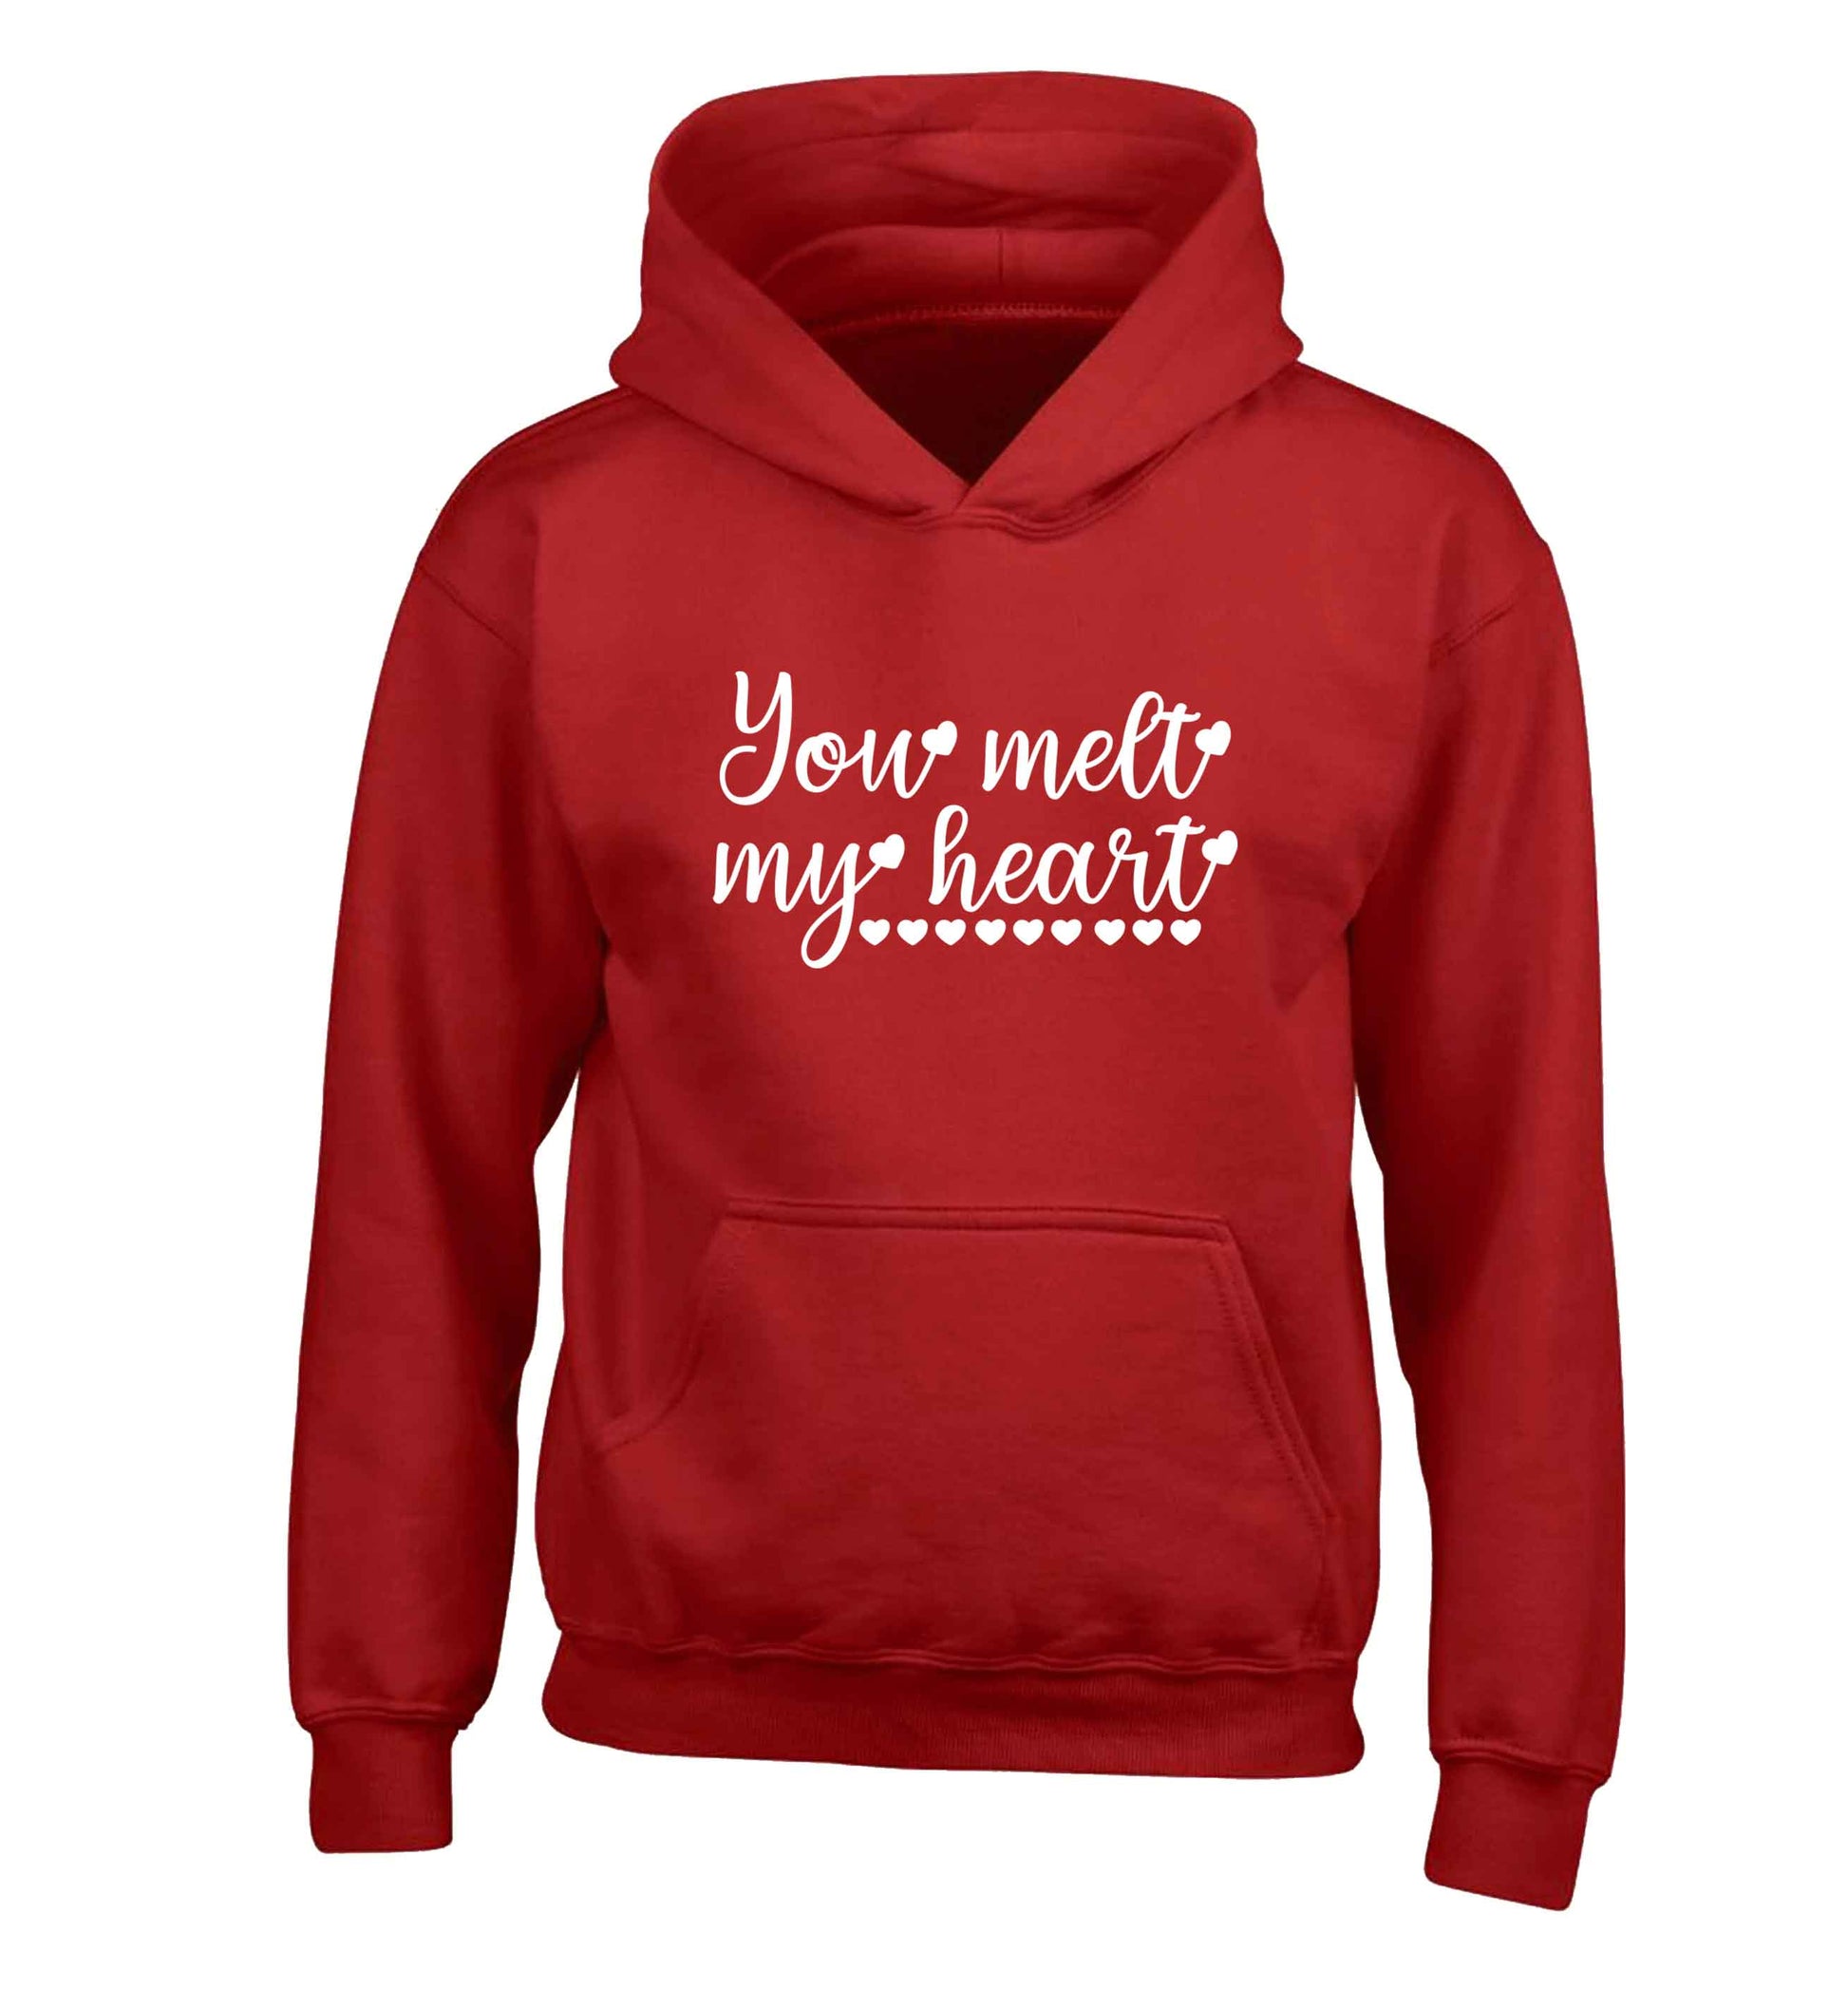 You melt my heart children's red hoodie 12-13 Years